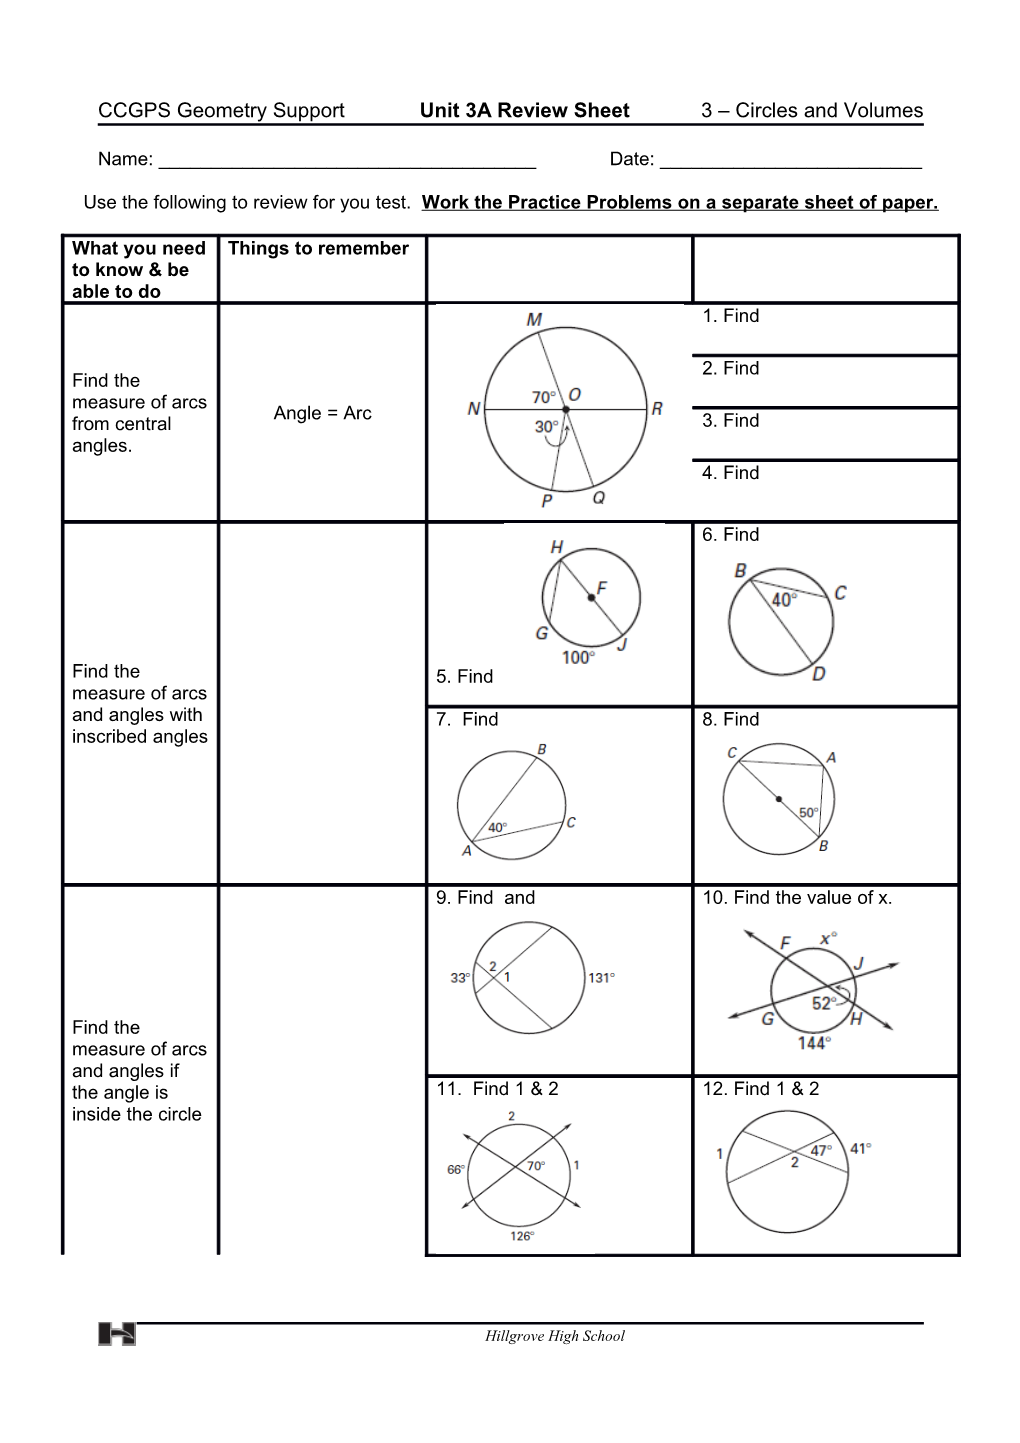 CCGPS Geometry Support Unit 3A Review Sheet 3 Circles and Volumes